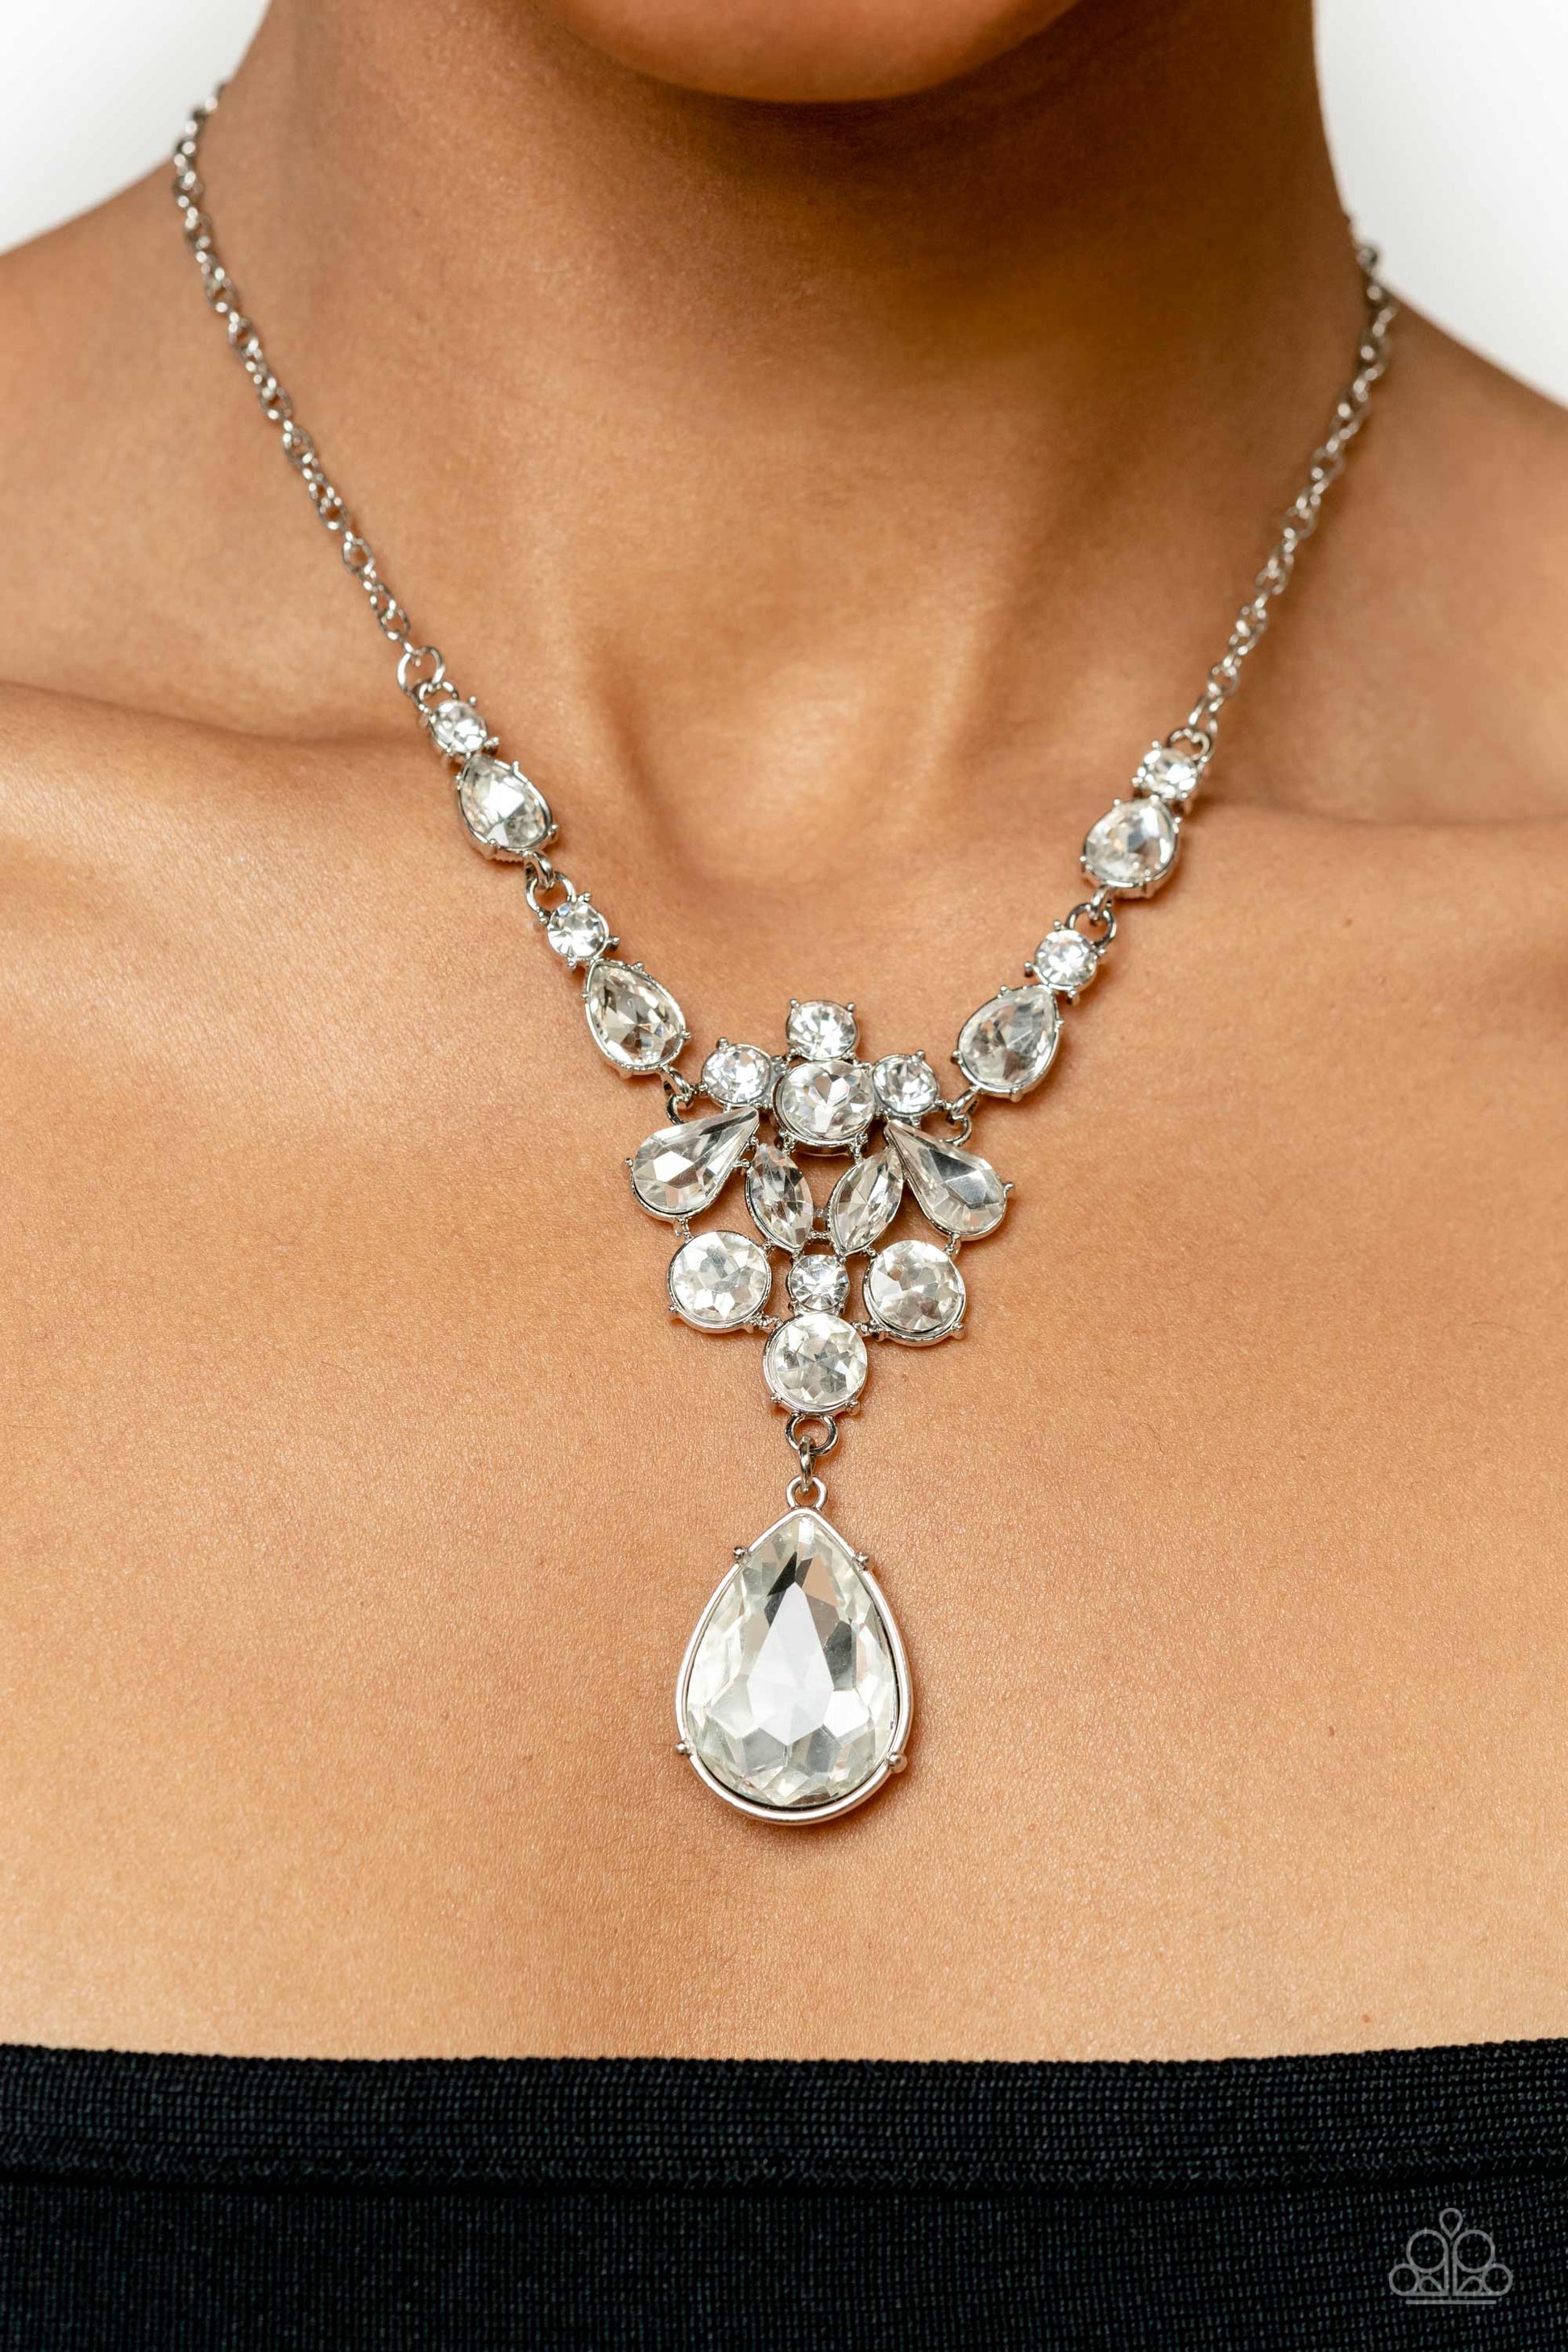 Paparazzi Accessories TWINKLE of an Eye - White Adorned with a dainty silver chain, a twinkling collection of white, reflective teardrops, rhinestones and marquise-cut gems glitter down the chest. Hanging at the bottom of the glittery collection, an overs